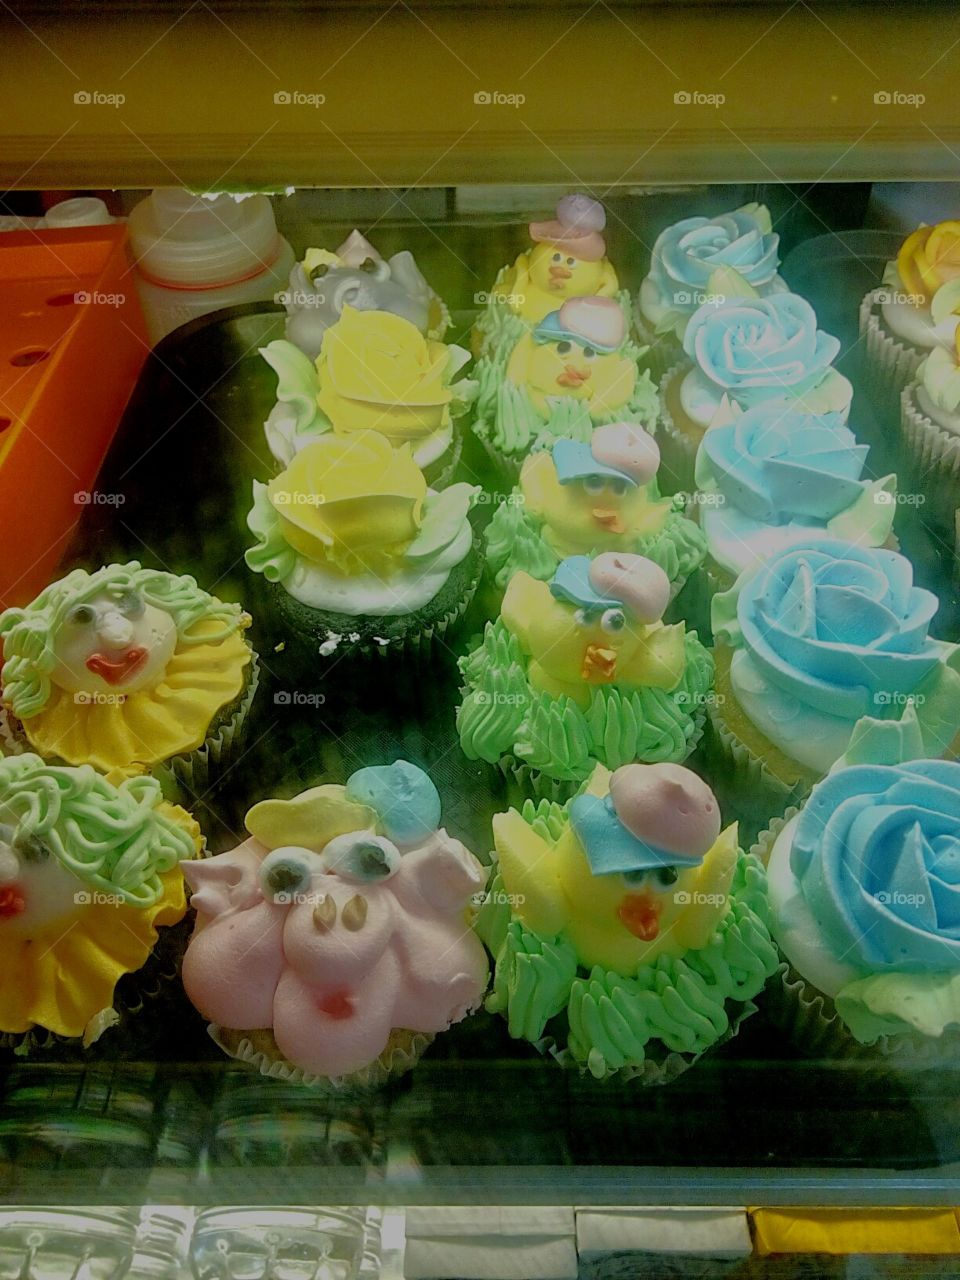 A happy Cupcakes starts with the decorations :D